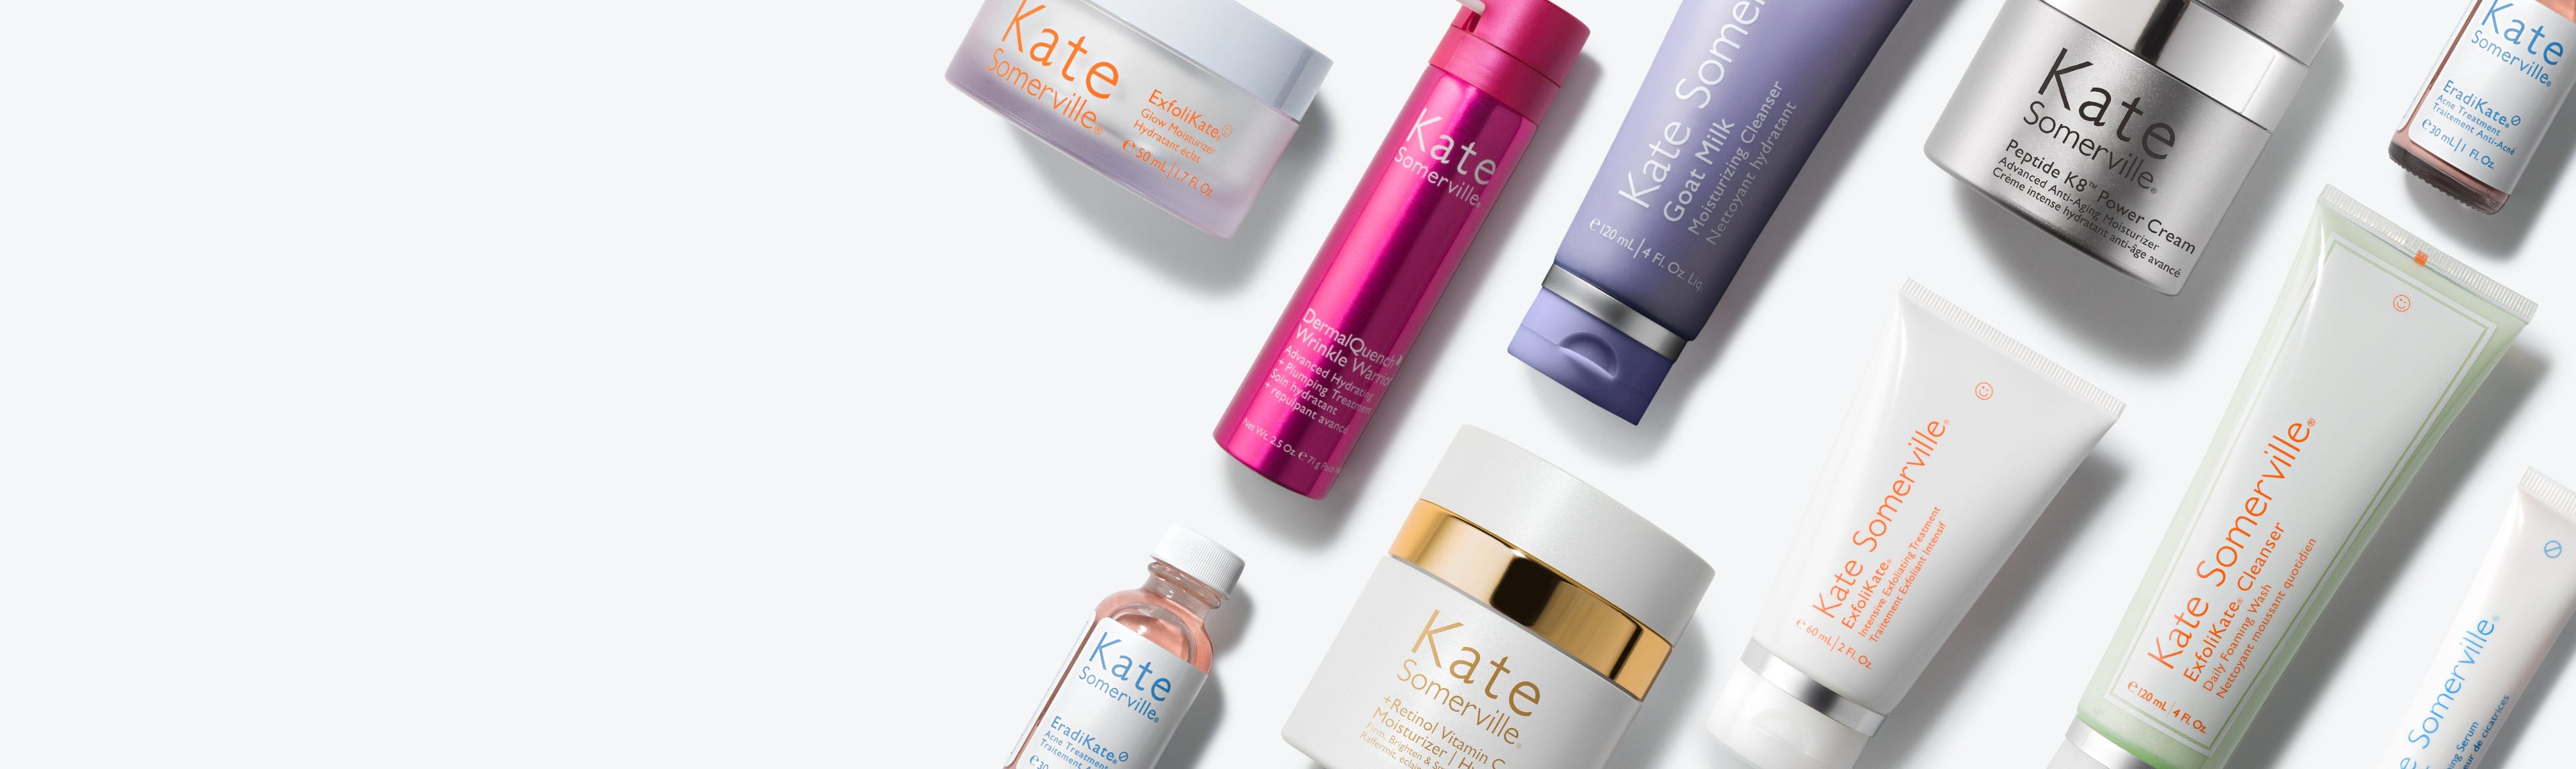 CLINICALLY-FORMULATED SKINCARE FOR EVERY SKIN TYPE